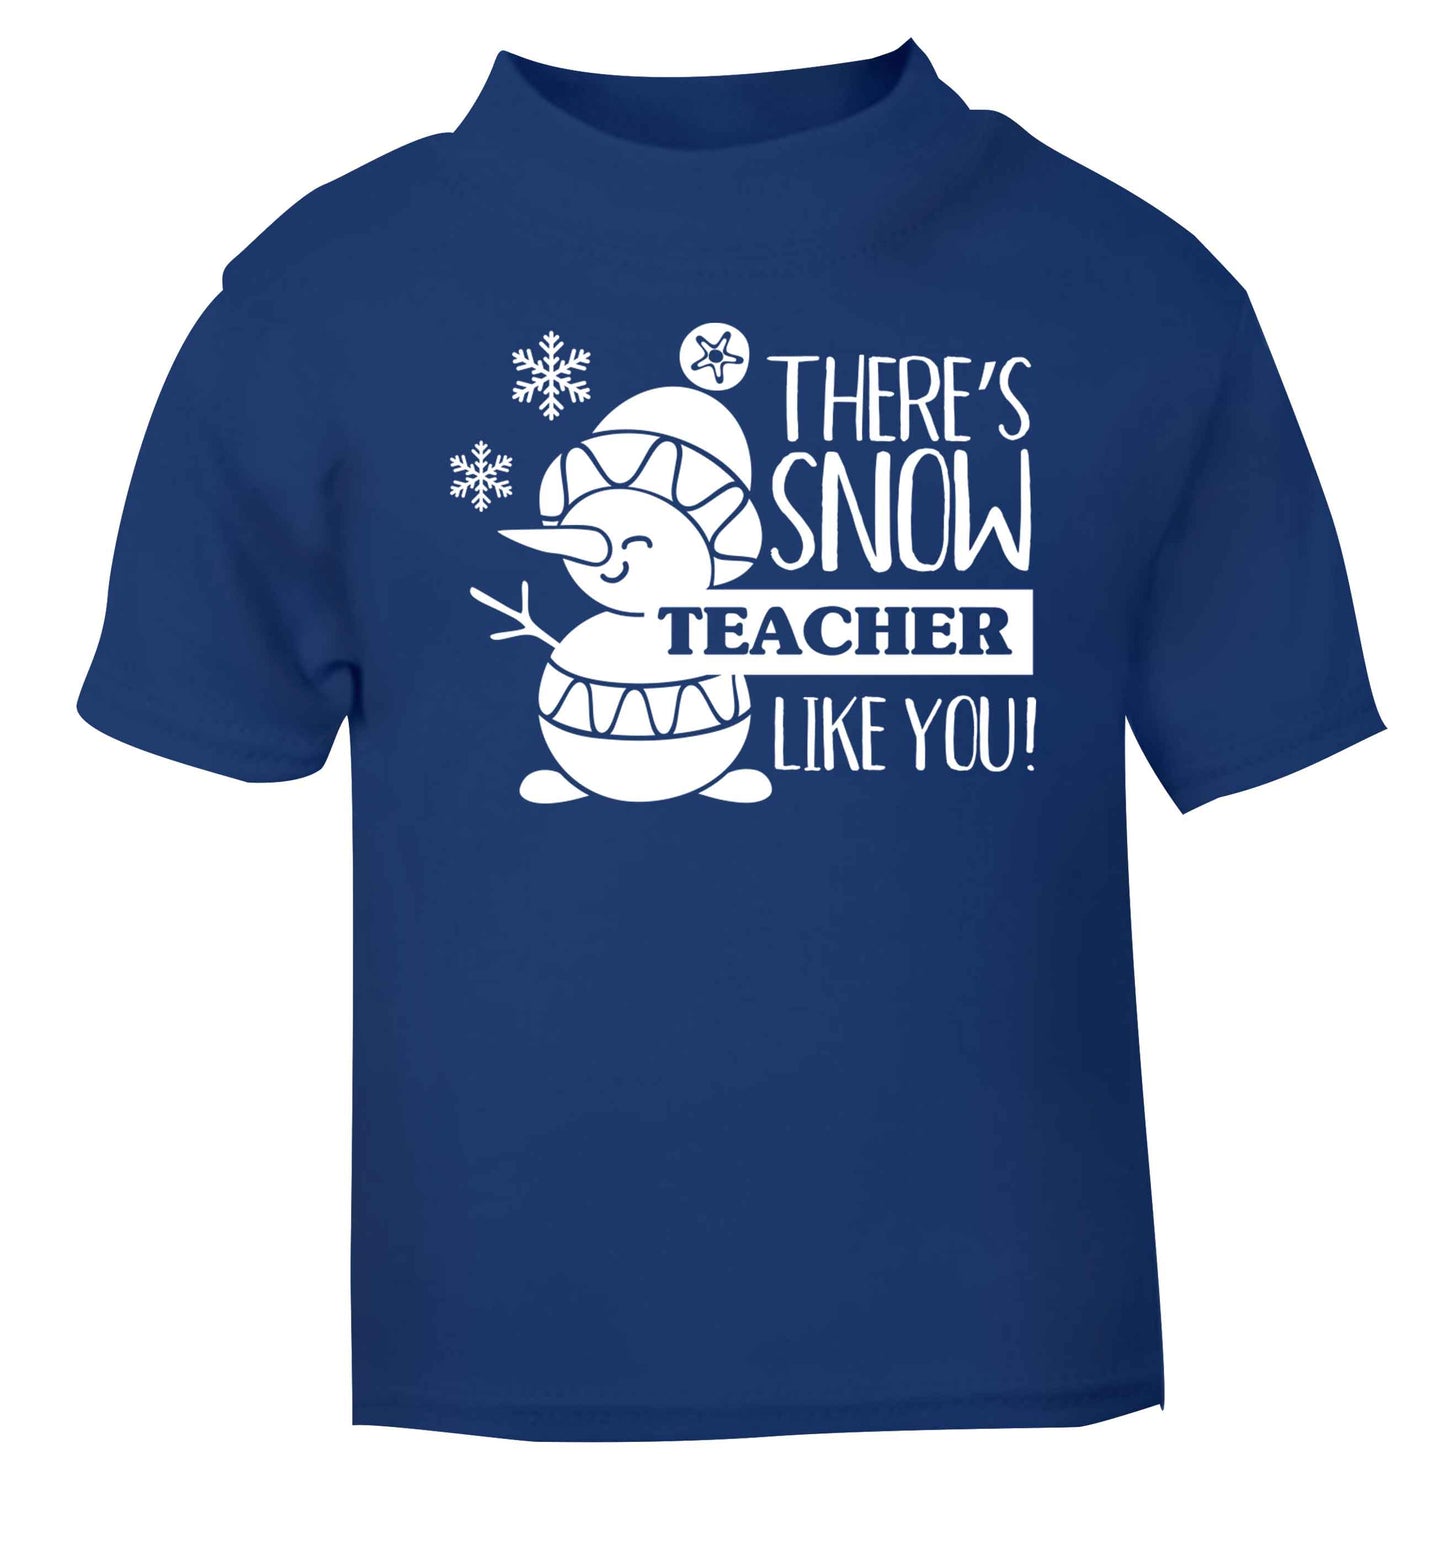 There's snow teacher like you blue baby toddler Tshirt 2 Years